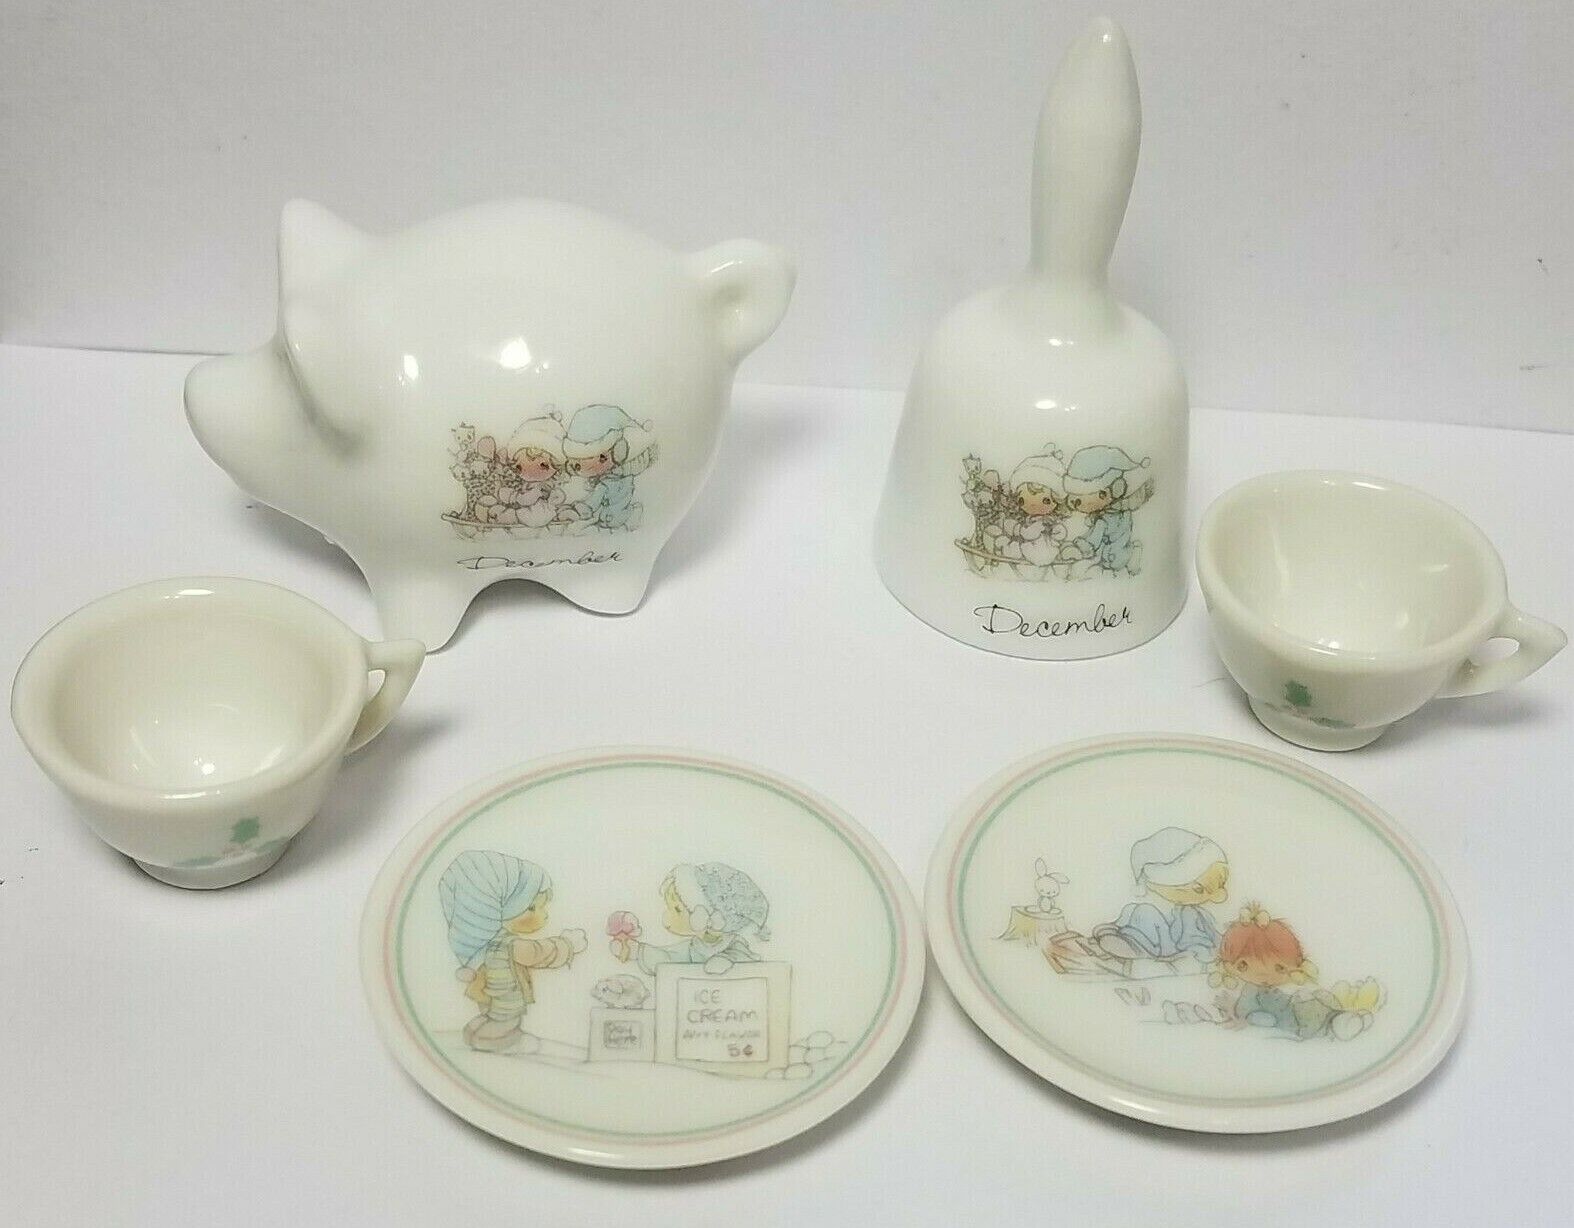 VTG 1989 DECEMBER MINIATURES PRECIOUS MOMENTS BELL PIG 2 PLATES 2 CUPS FIGURINES